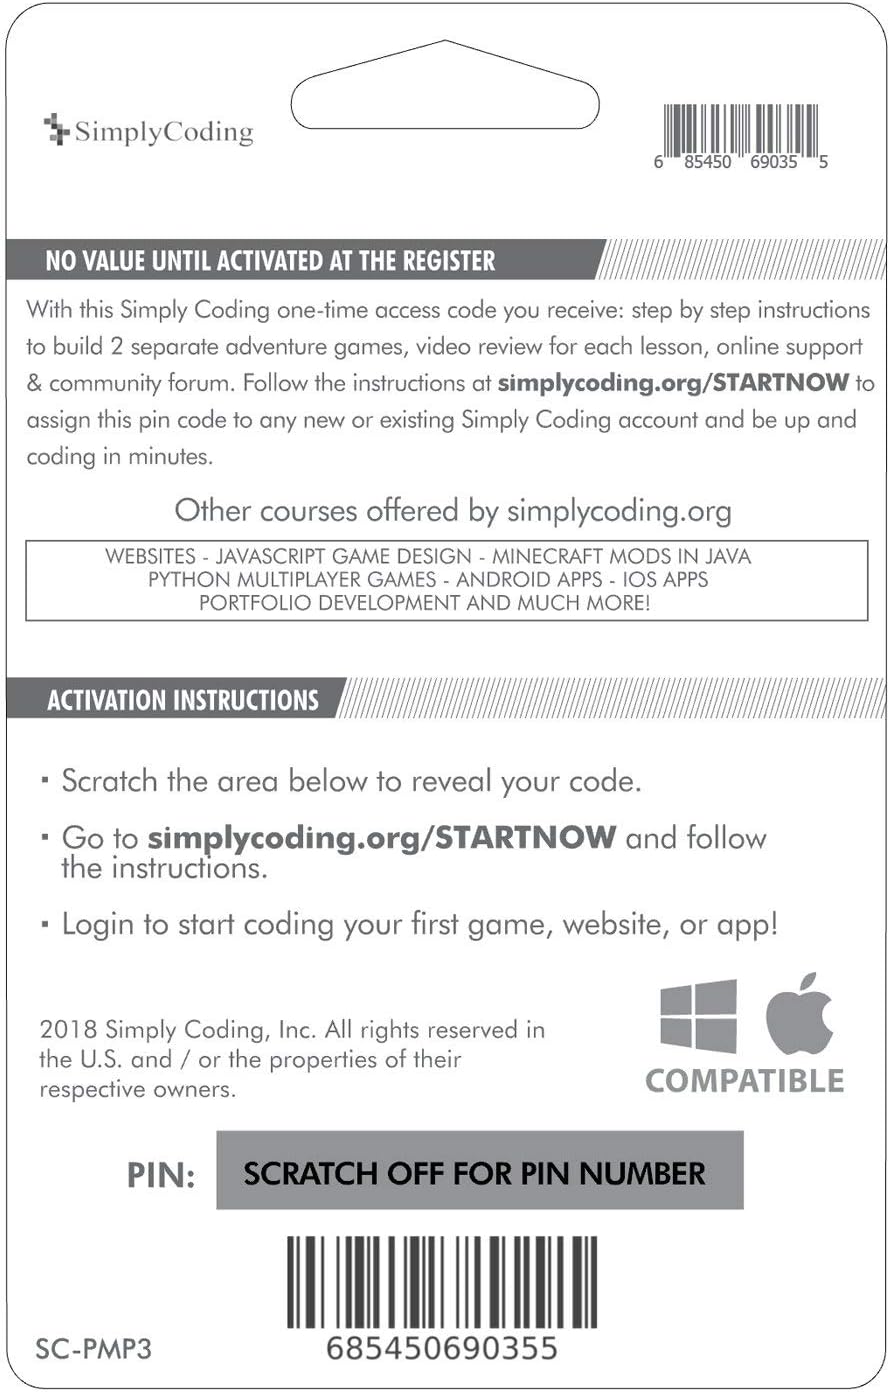 Coding for Kids: Learn to Code Python Multiplayer Adventure Games - Video Game Design Coding Software - Computer Programming for Kids, Ages 12-18, (PC, Mac Compatible)